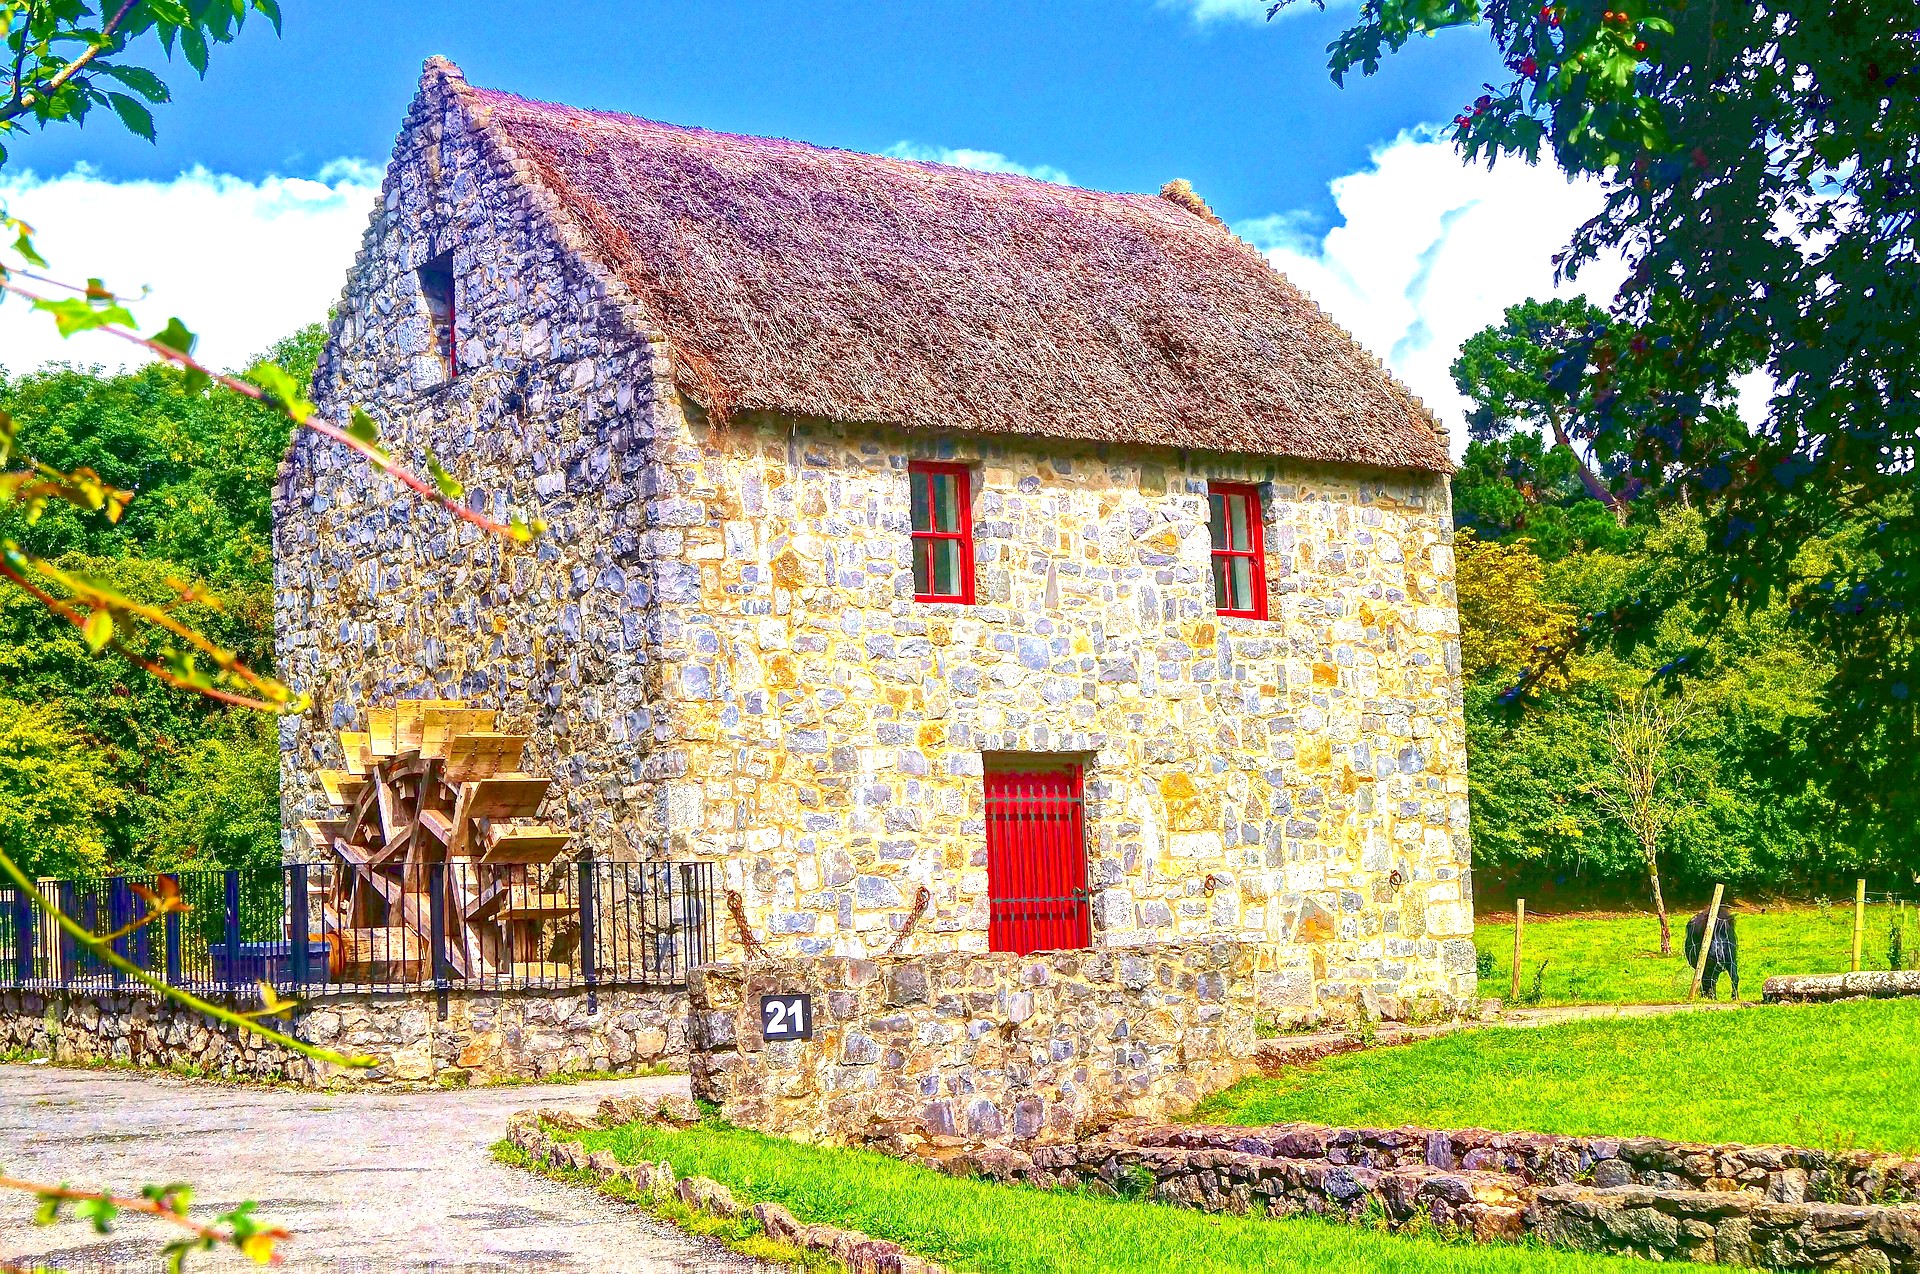 <img src="stone cottage.jpg" alt="stone cottage buying your first home"/> 